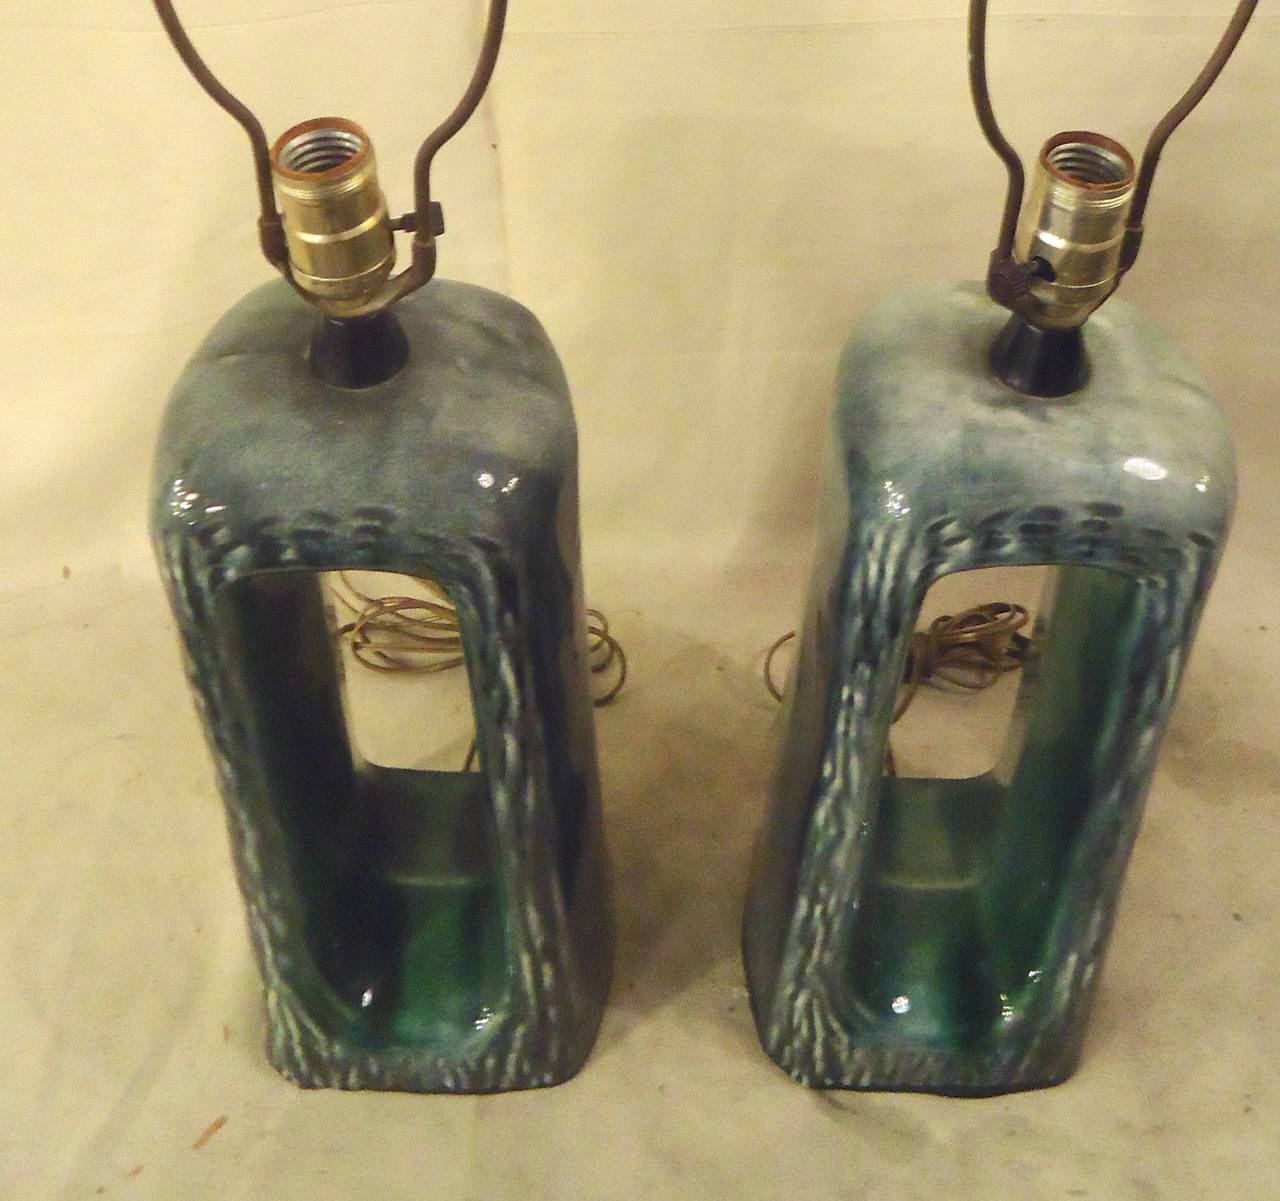 Pair of vintage modern table lamps by Heifetz of NY. Nice green, blue and grey coloring, with a sculptural element.
Height is 16